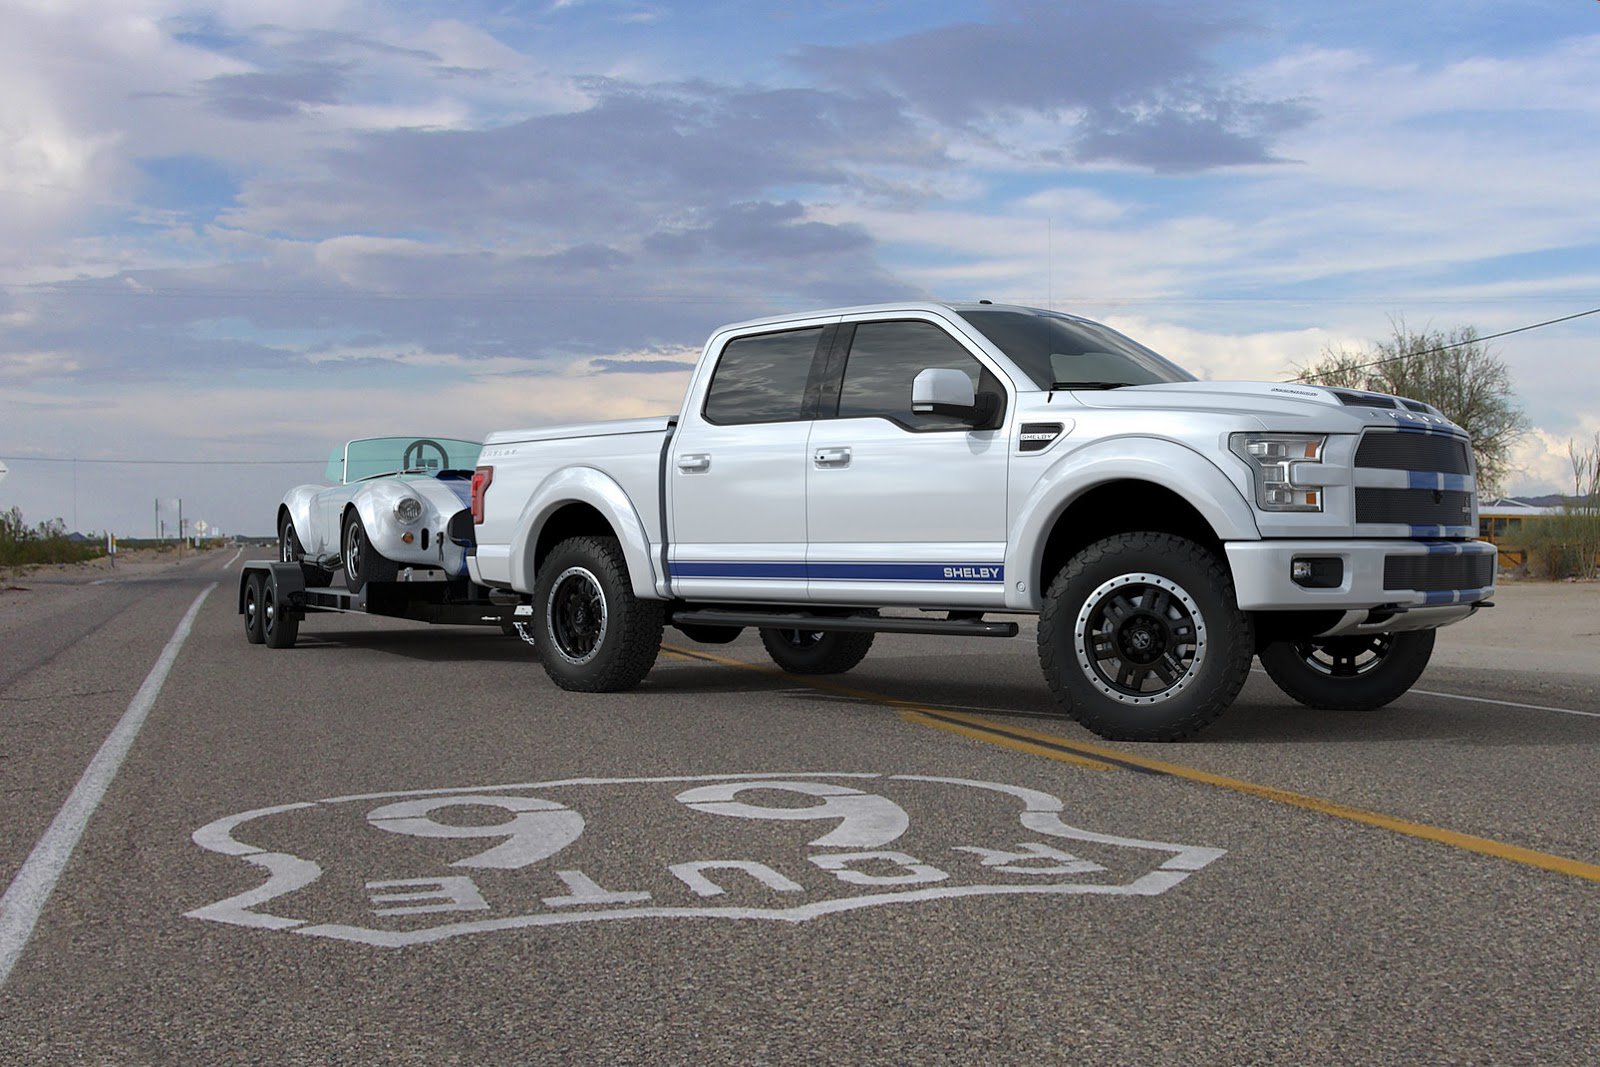 Can't Wait for the 2017 Ford F-150 Raptor? Here's the 2016 Shelby F-150 - autoevolution1600 x 1067